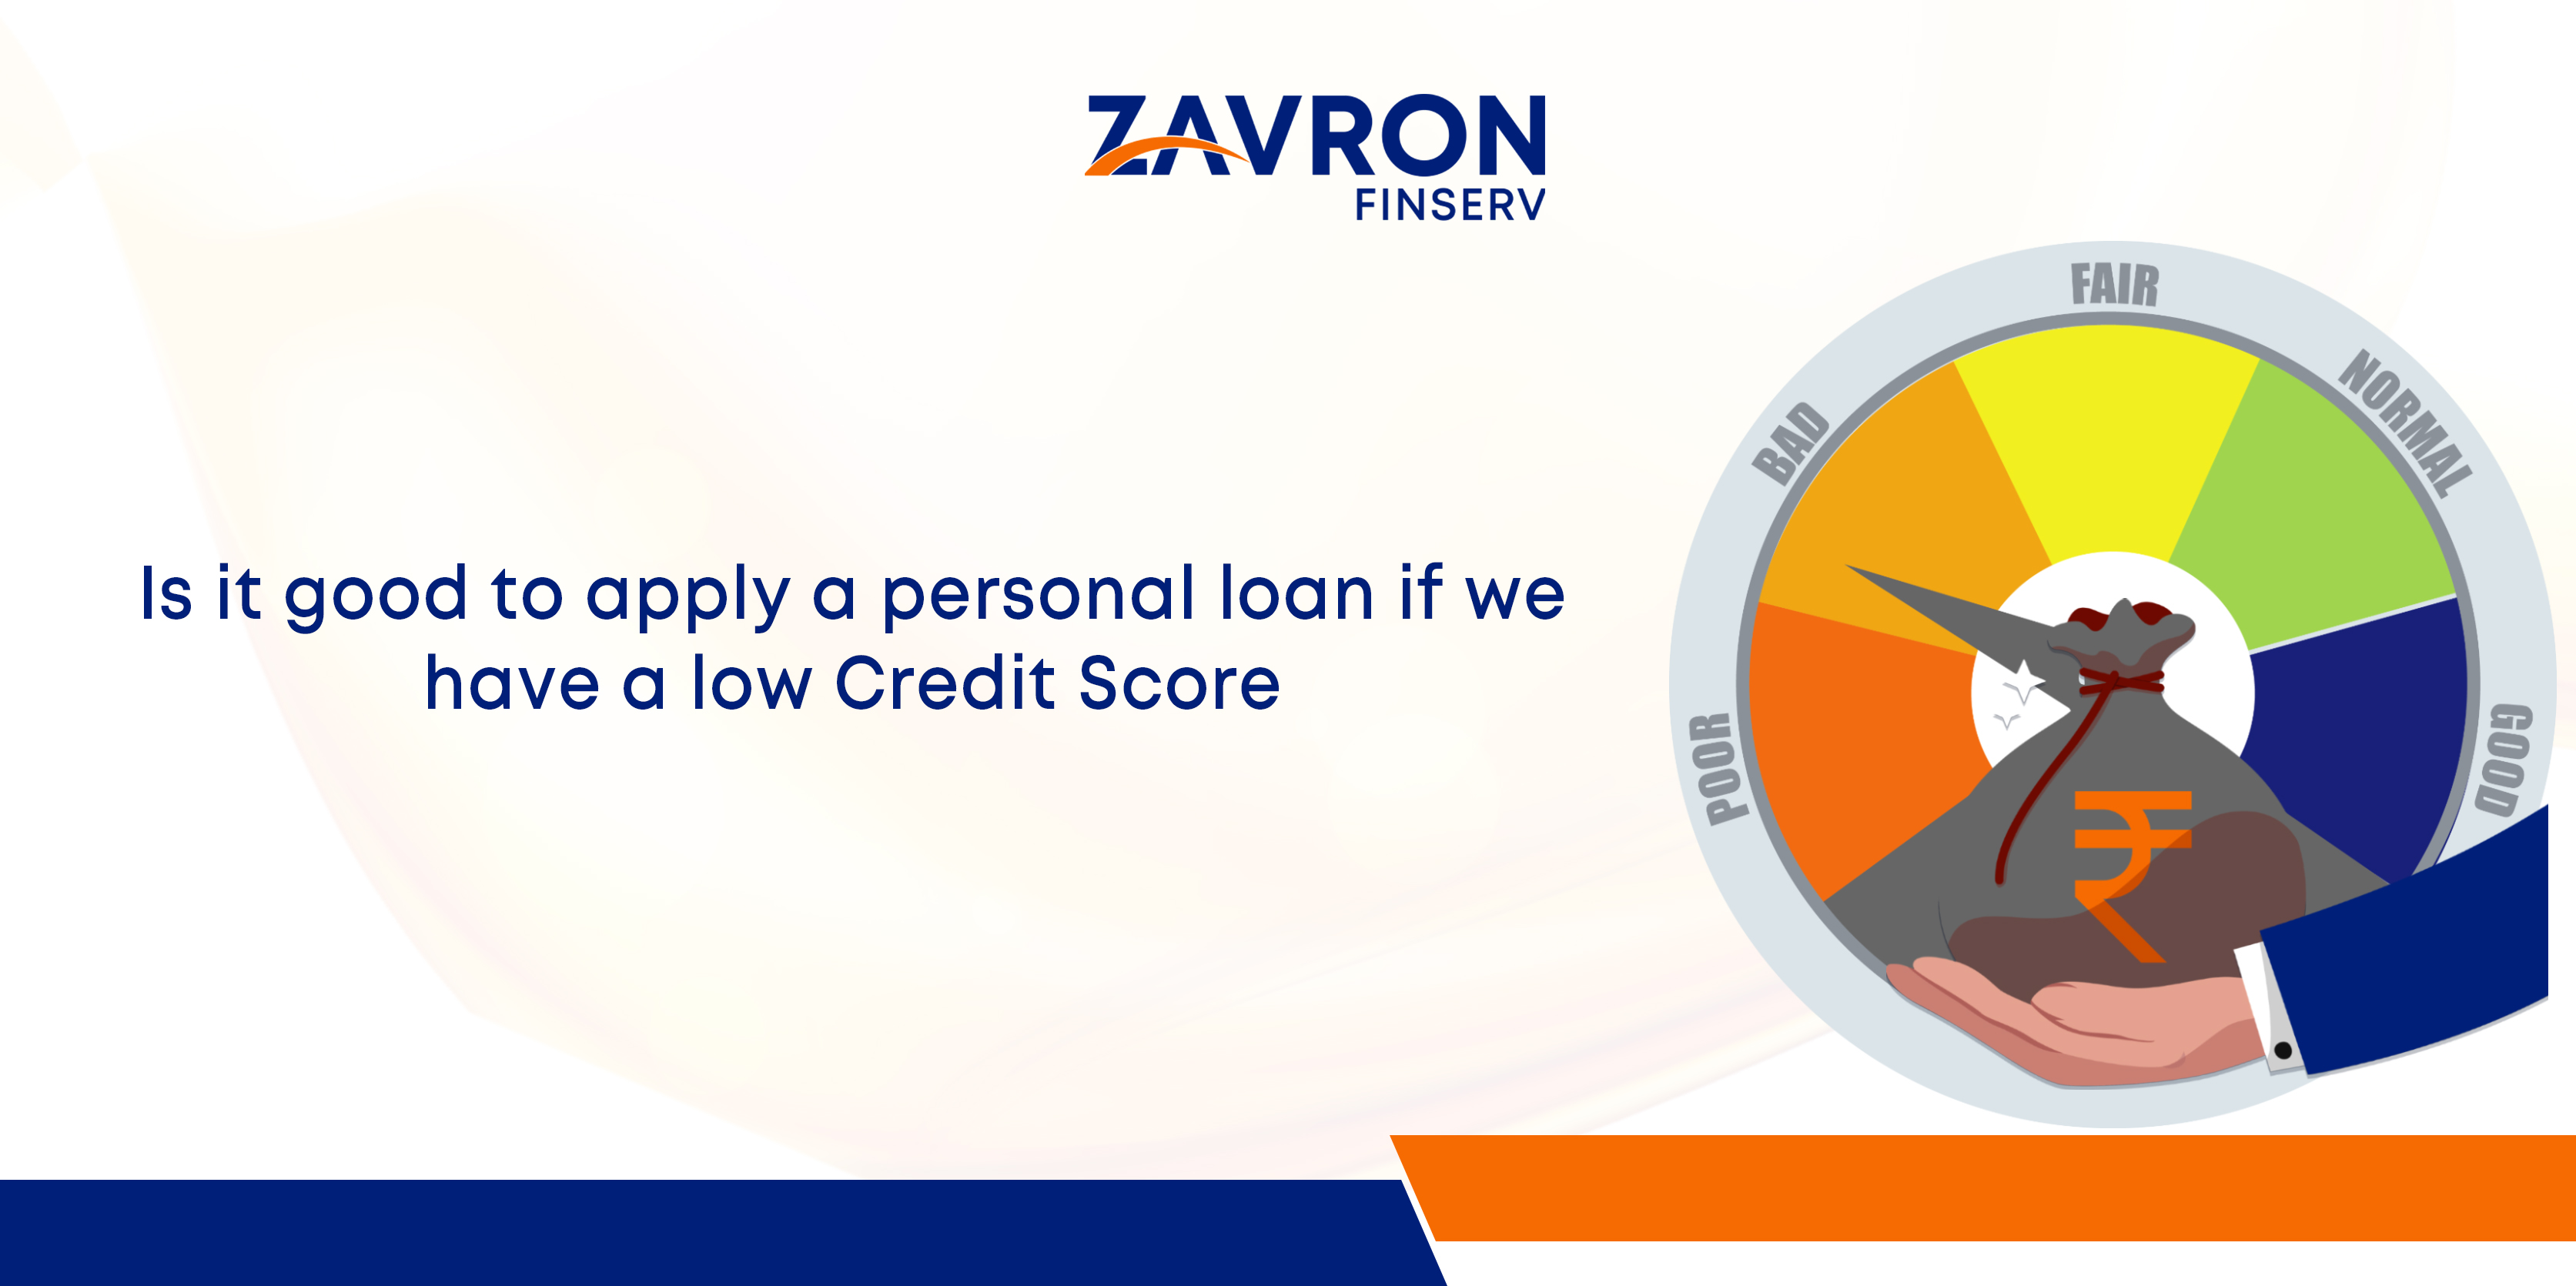 Is it good to apply for a personal loan if we have a low Credit Score